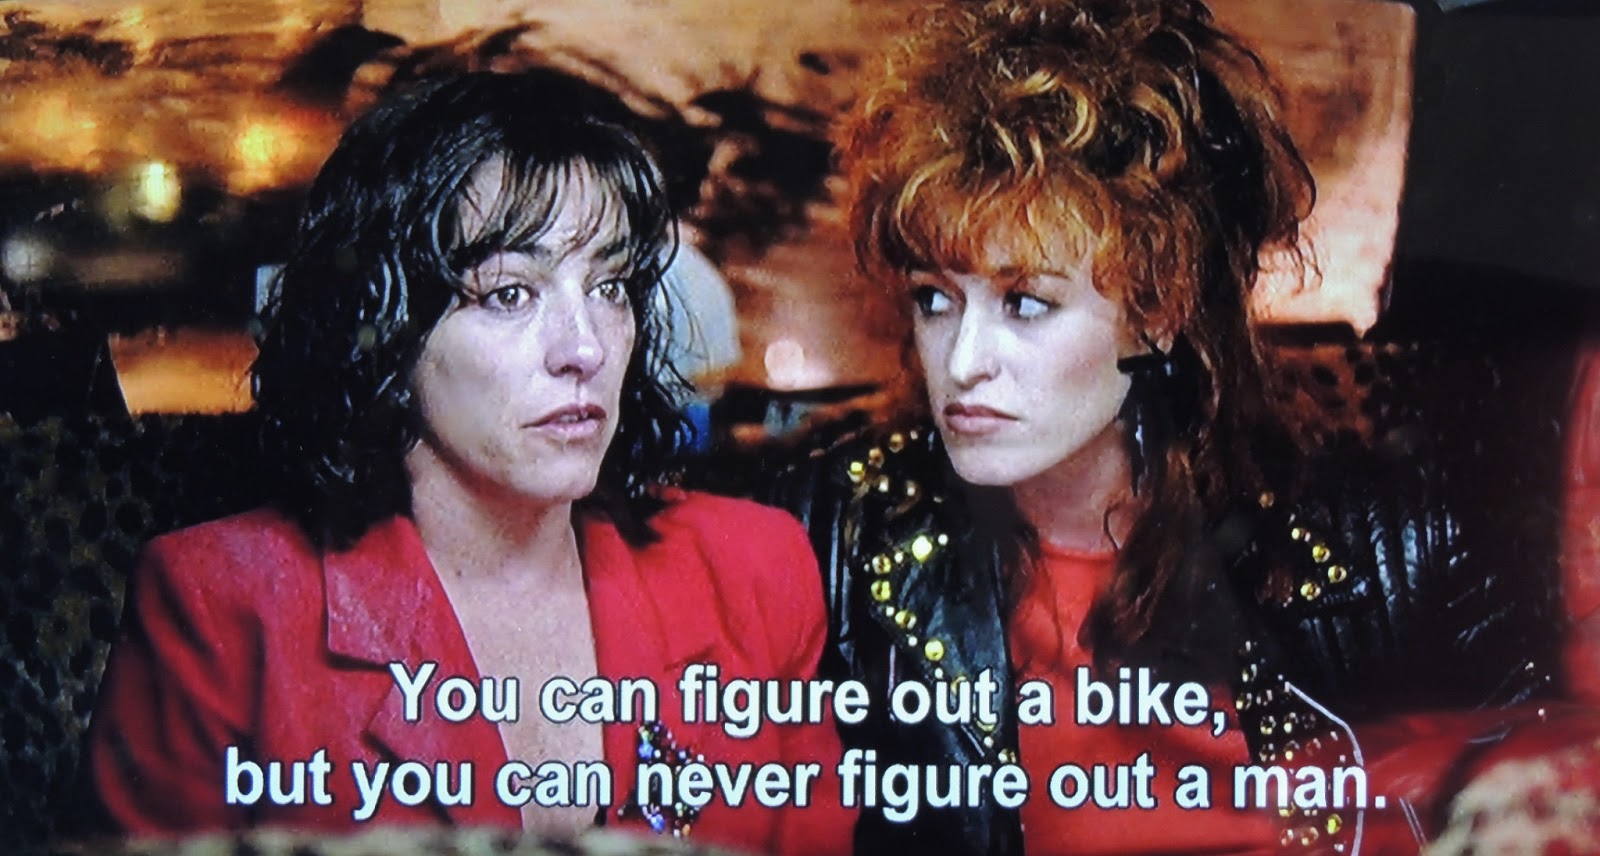 My Soul Is Raining Clothes: Style in Almodovar's 'Women on the Verge...'1600 x 856